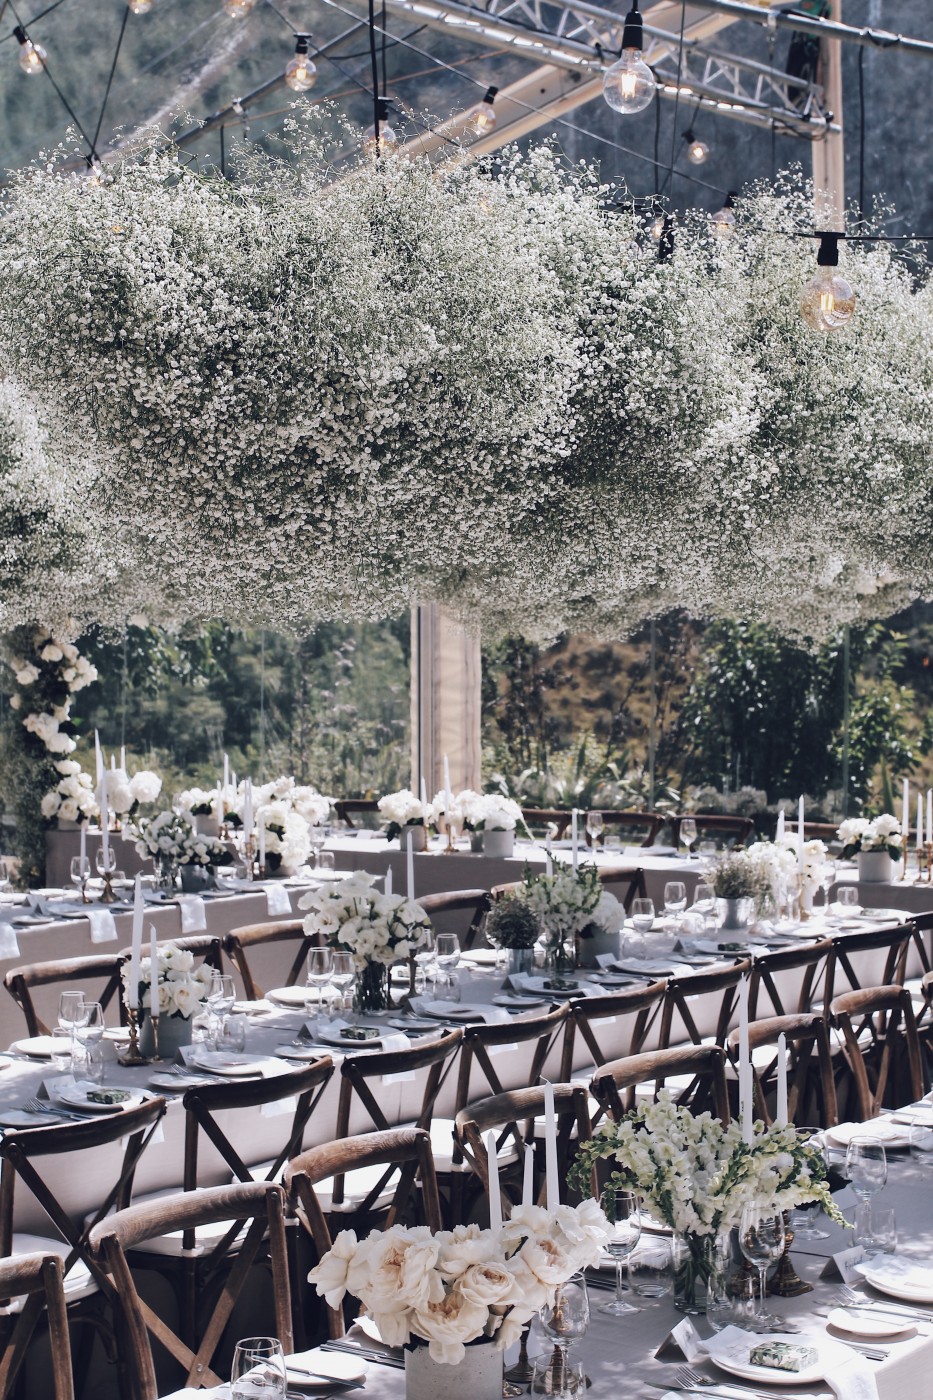 One Fine Day wedding styling - reception decor, table settings and floral arrangements